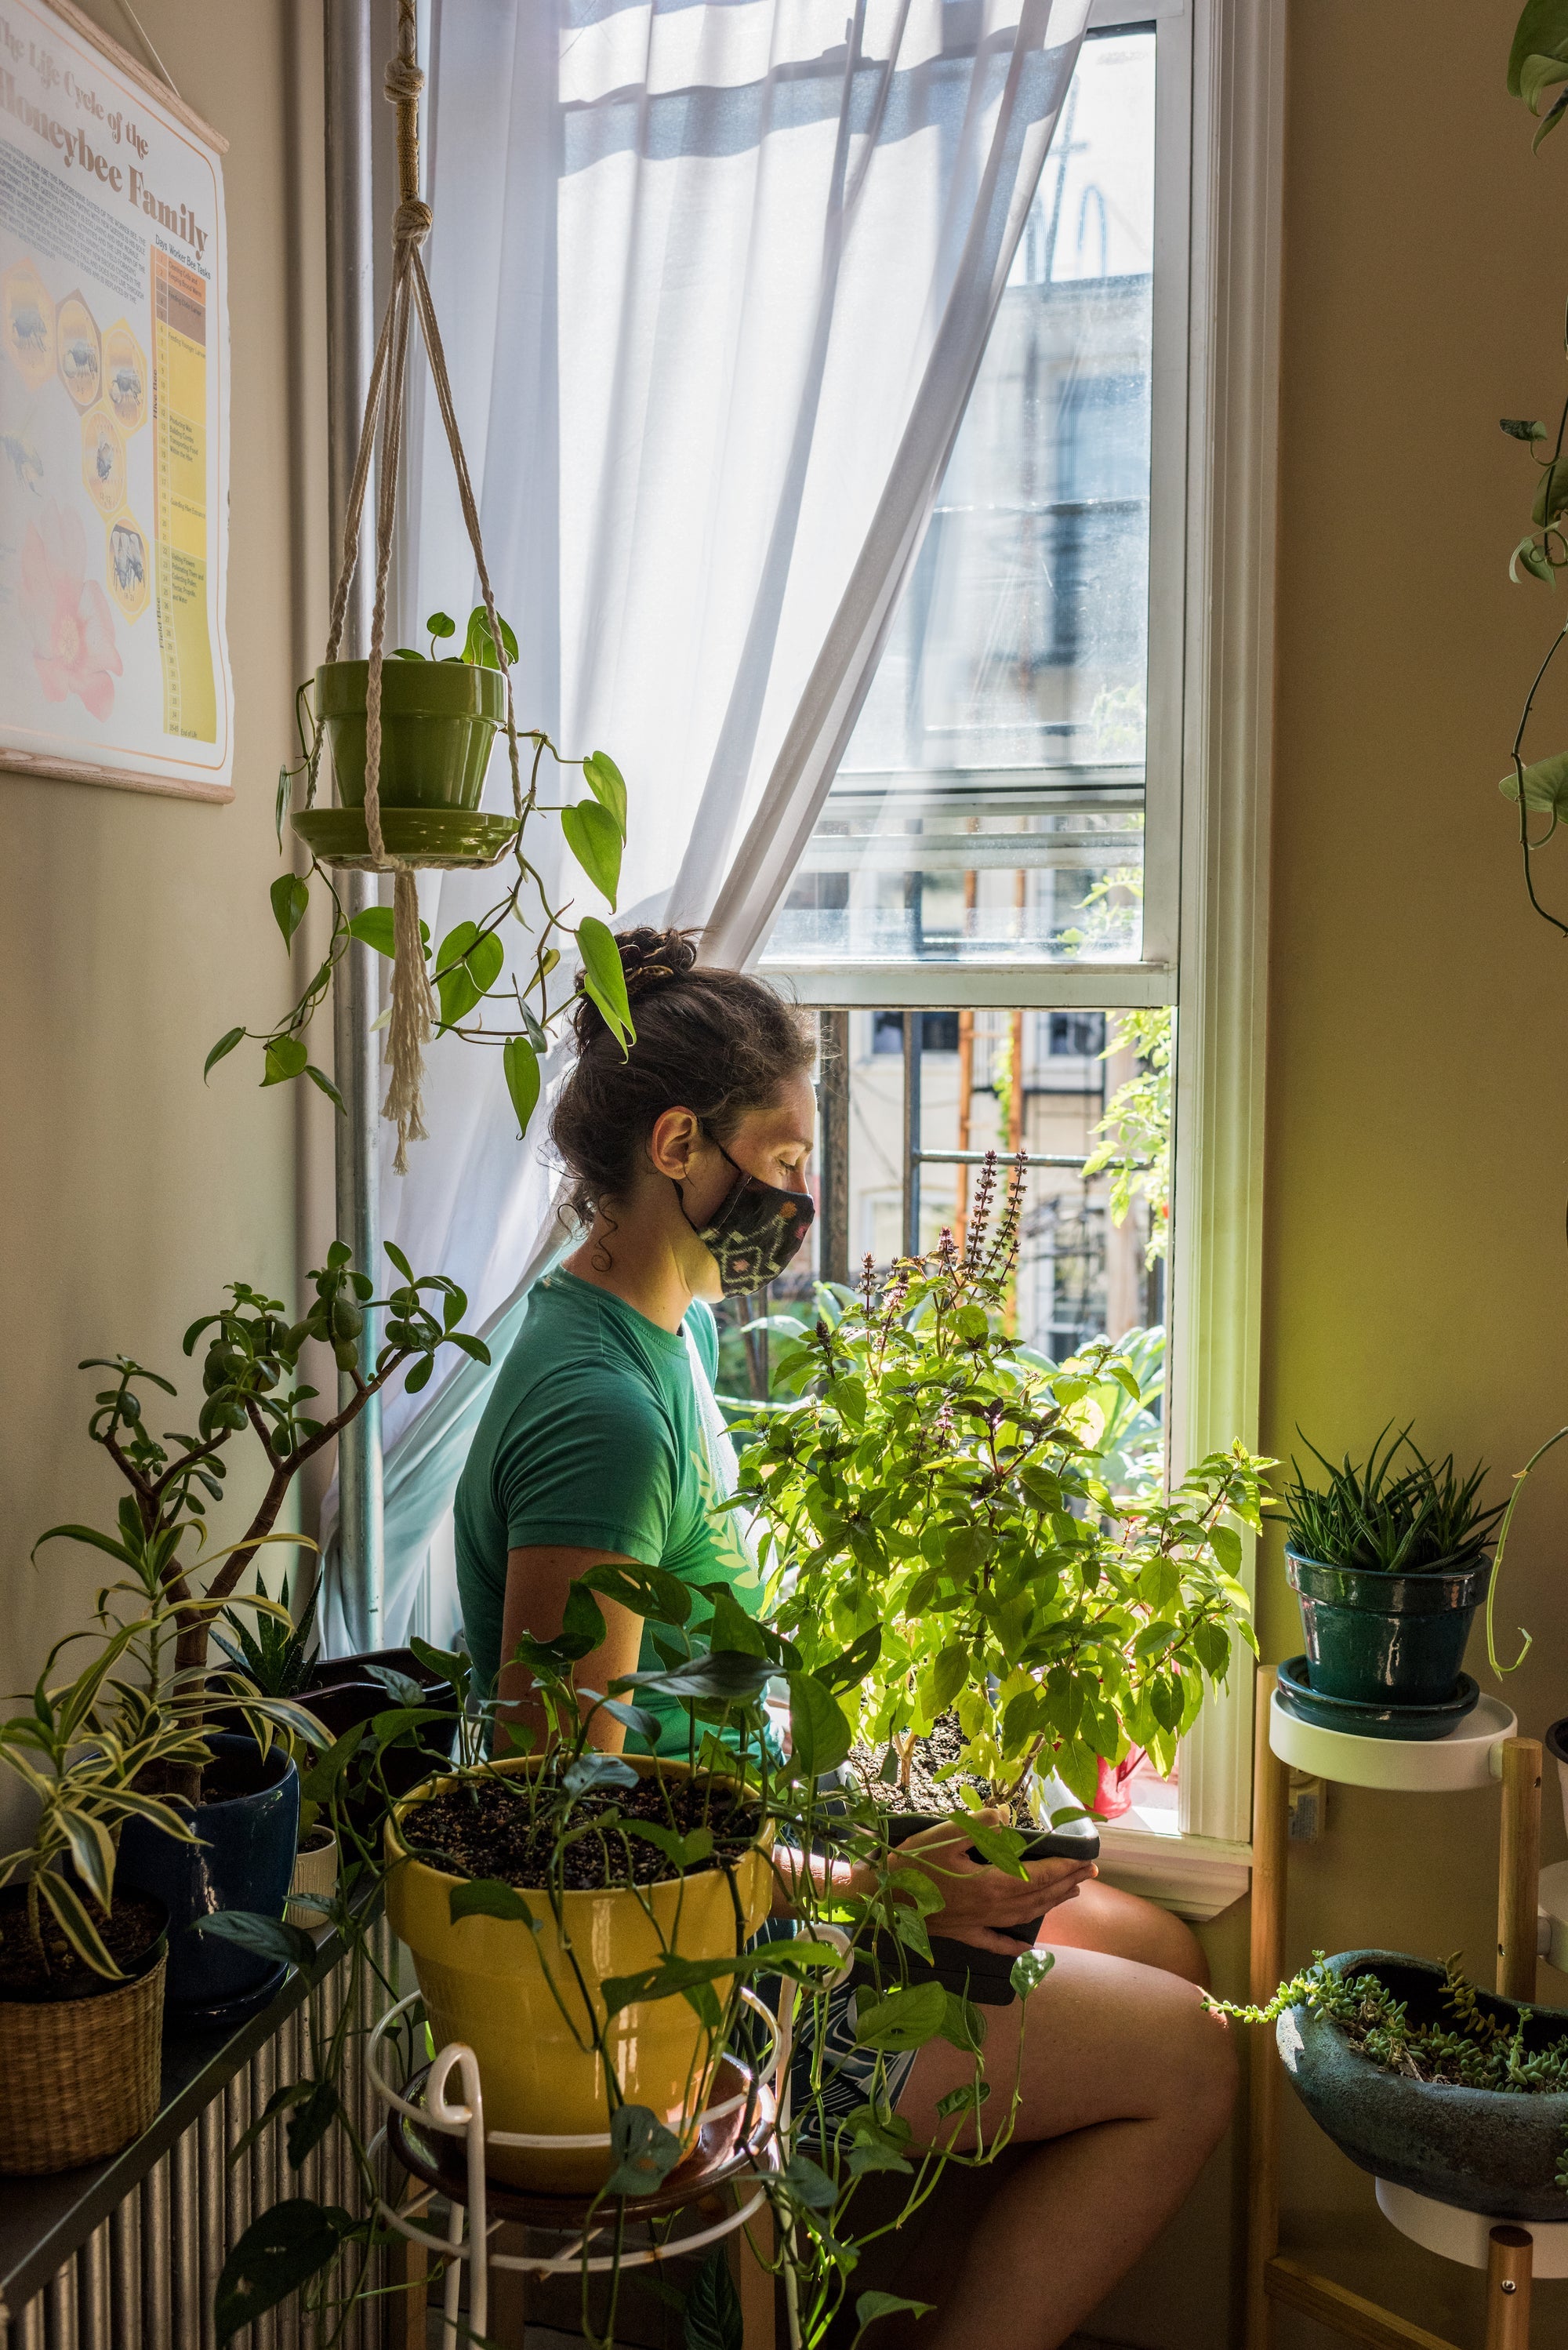 URBAN FARMERS THE NOW (AND HOW) OF GROWING FOOD IN THE CITY